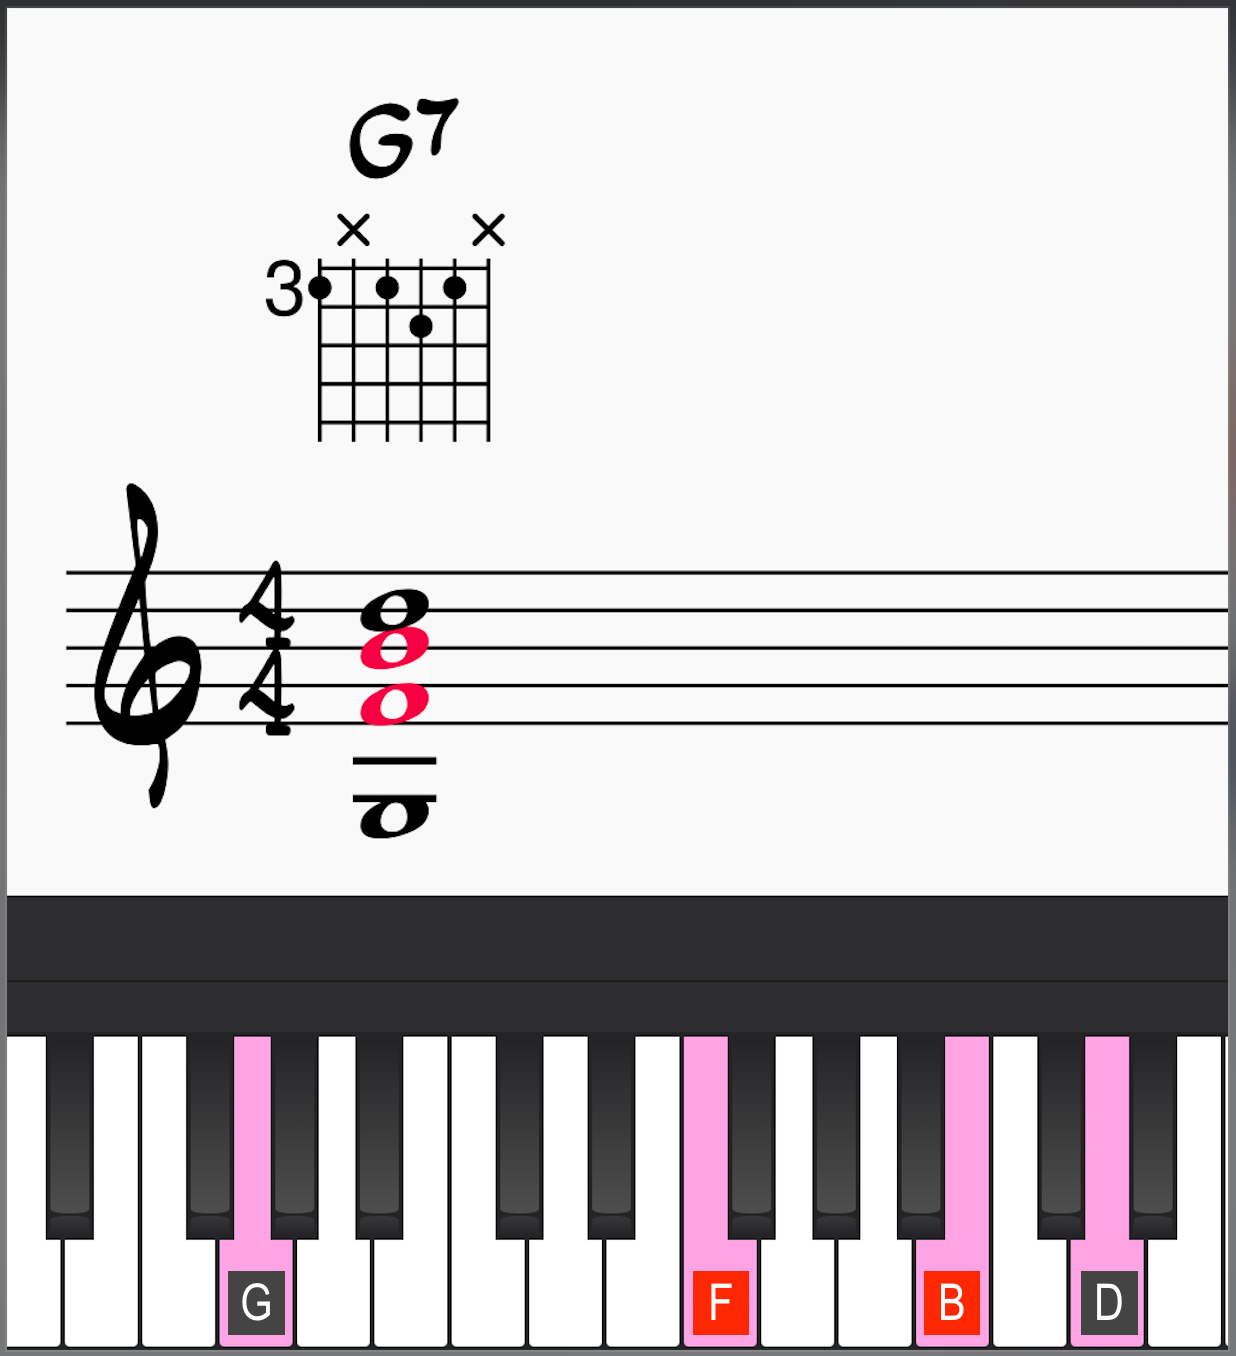 The Notes in a G7 chord on jazz guitar and piano